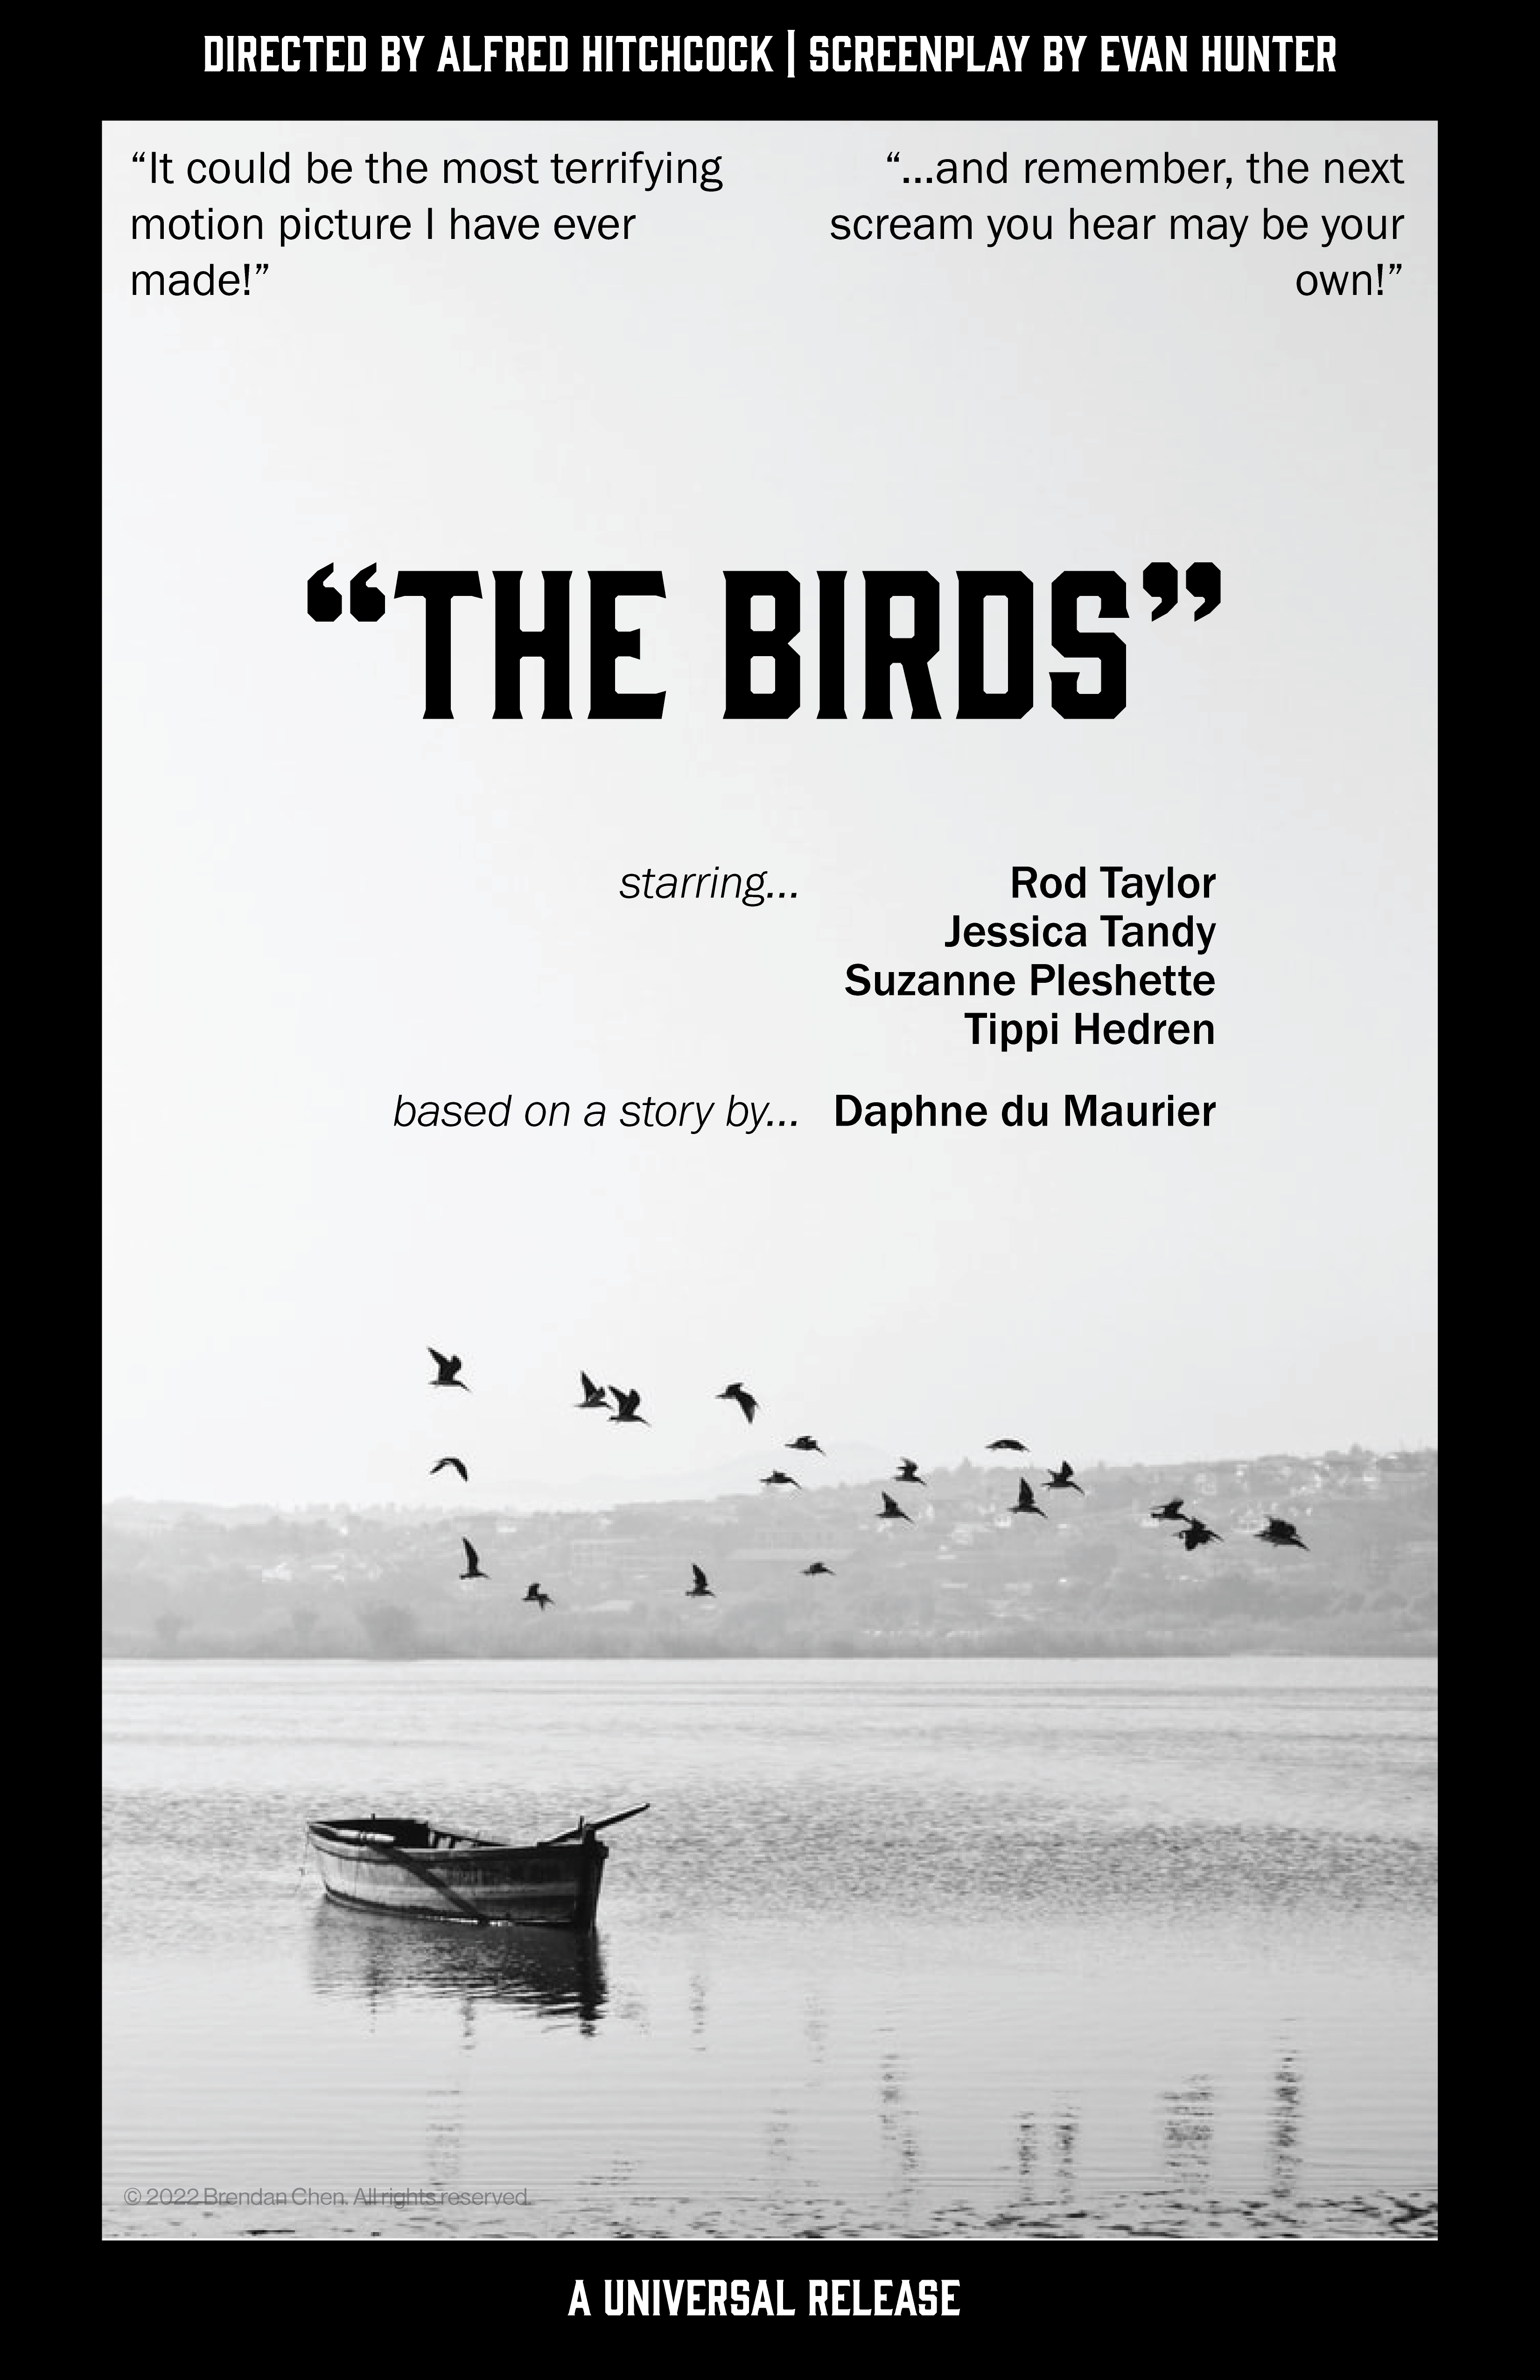 Preview image for "The Birds" movie poster